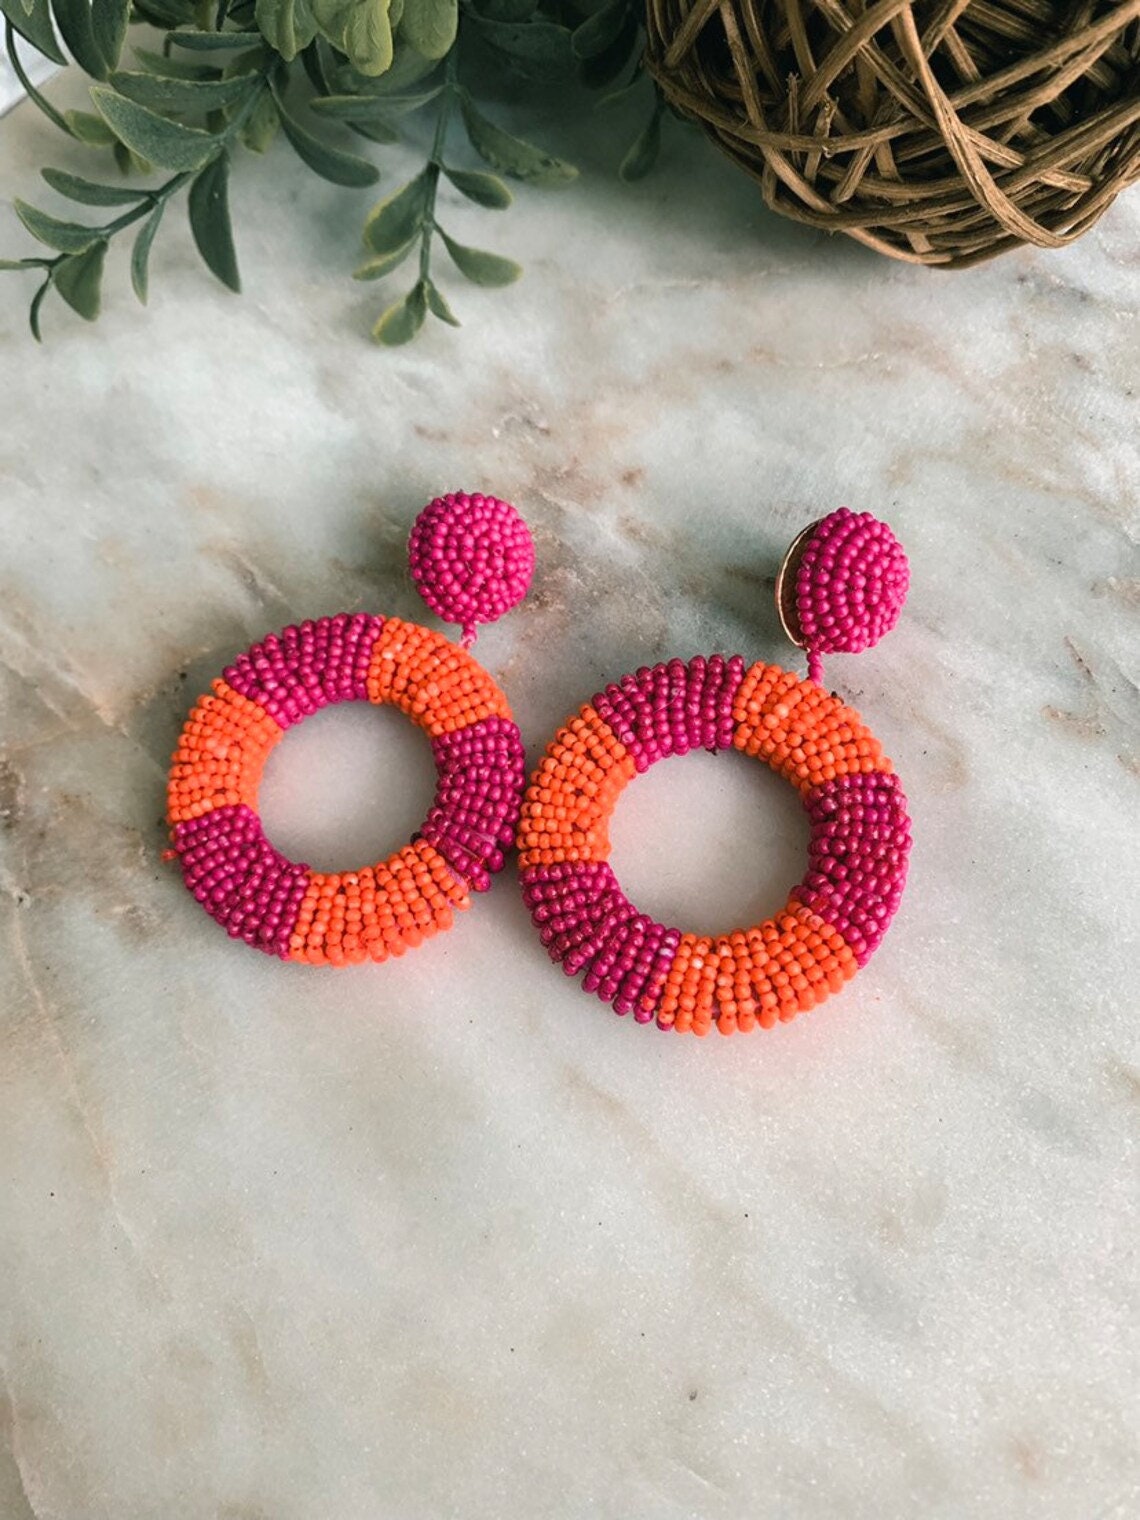 Beaded Circle Earrings for Women / Statement Earrings / Beaded Earrings / Seed Bead Earrings / Gift for Friend / More Colors Available